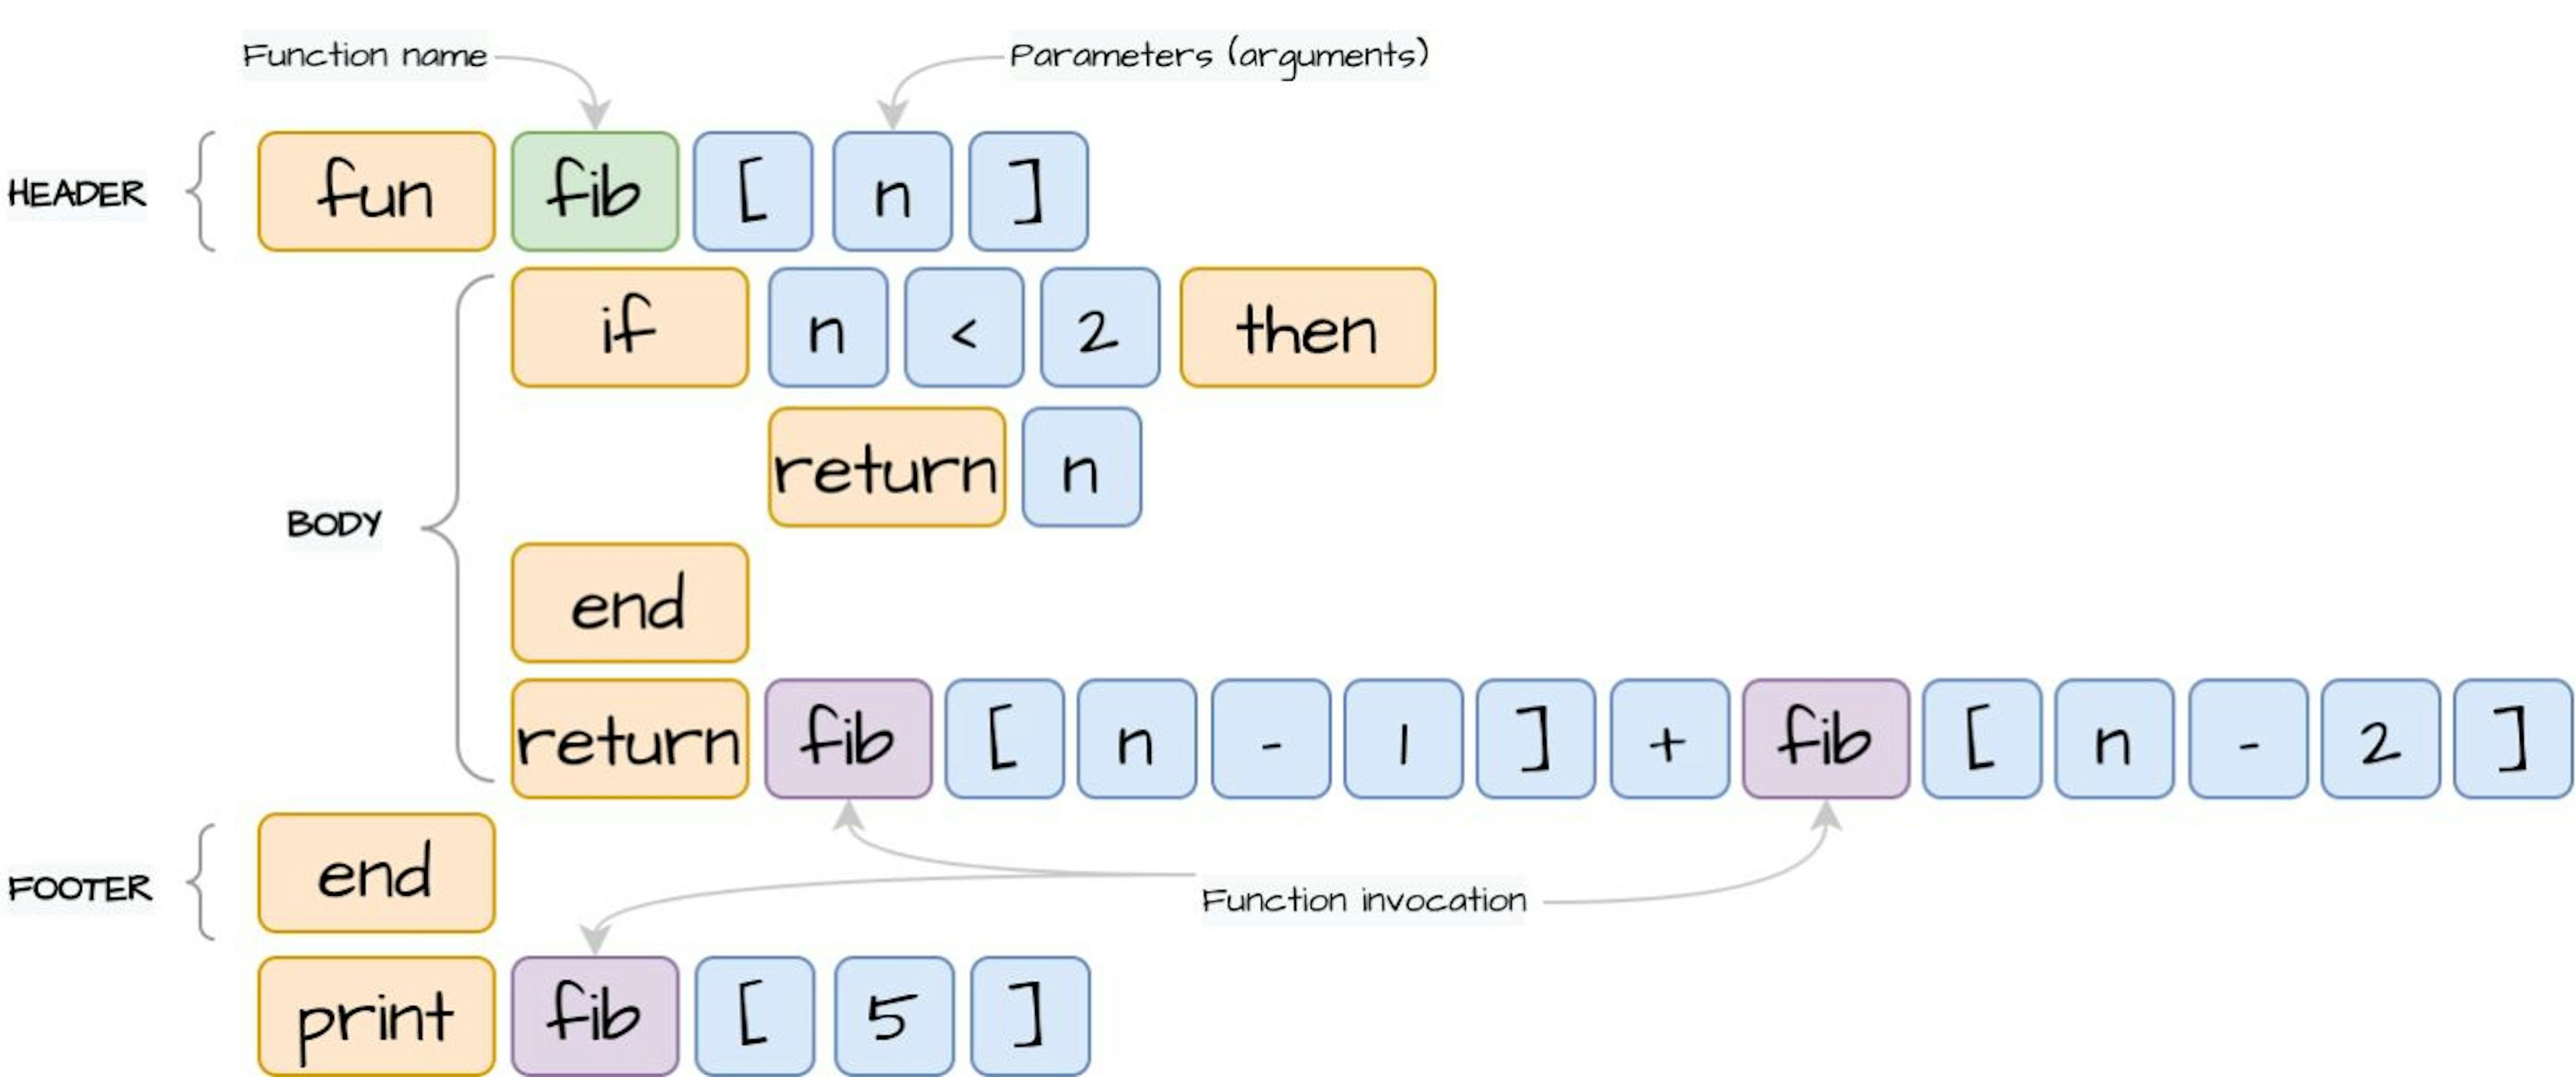 /building-your-own-programming-language-from-scratch-part-iv-implementing-functions feature image